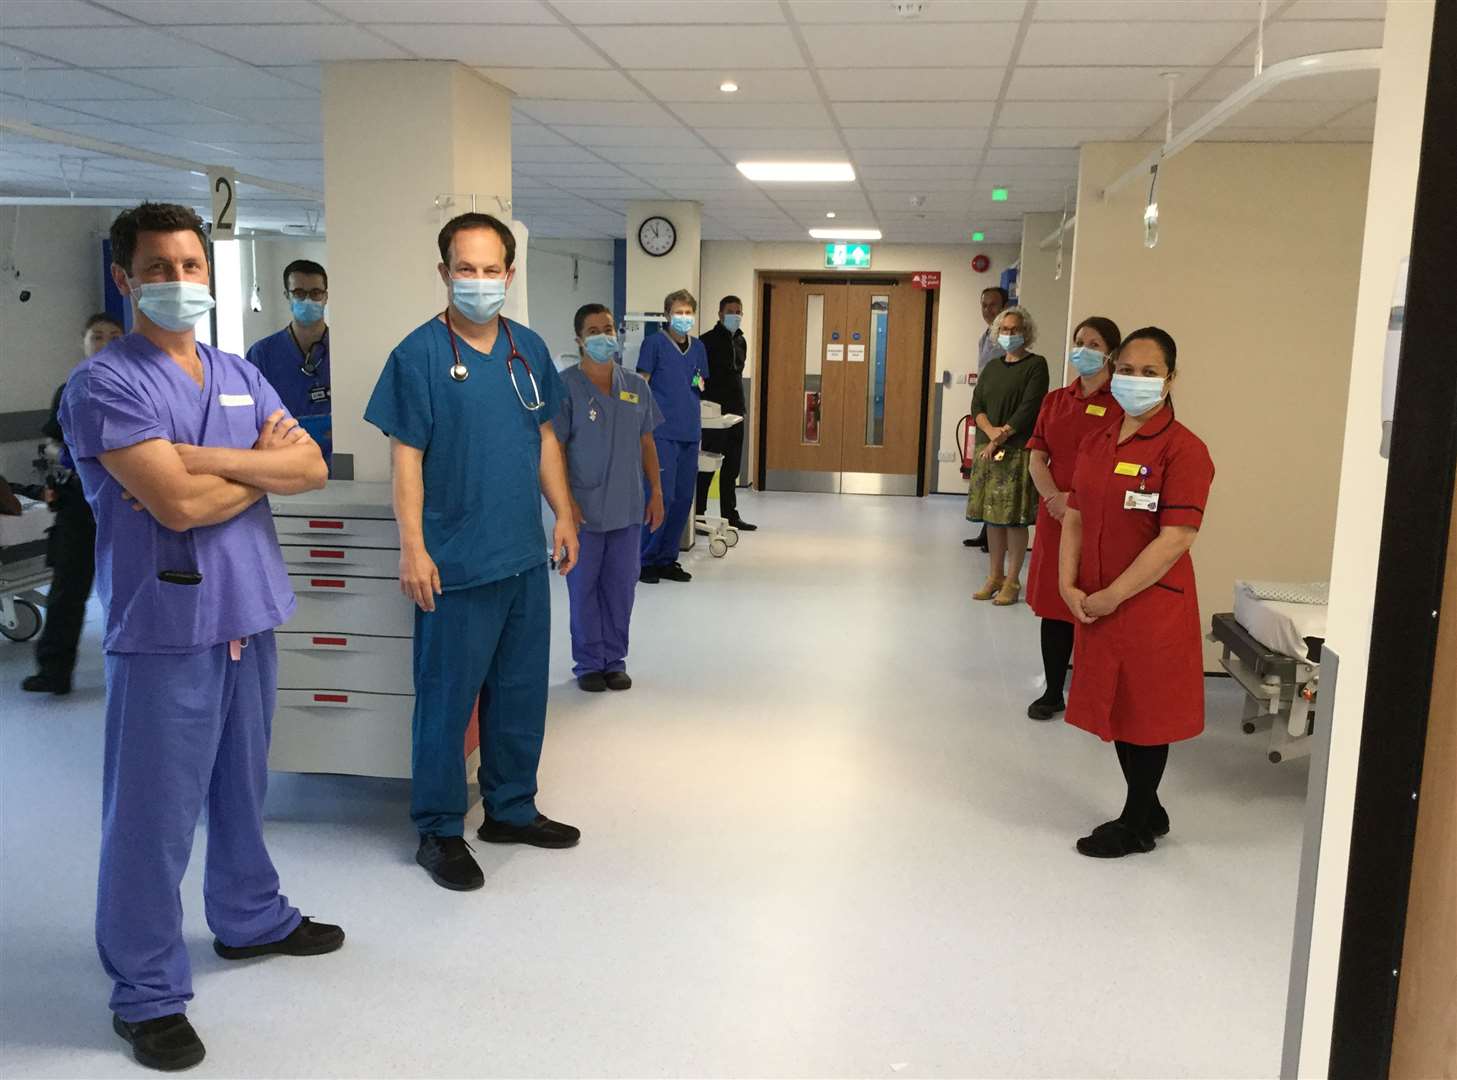 Staff at Maidstone Hospital on the day the new assessment area was opened